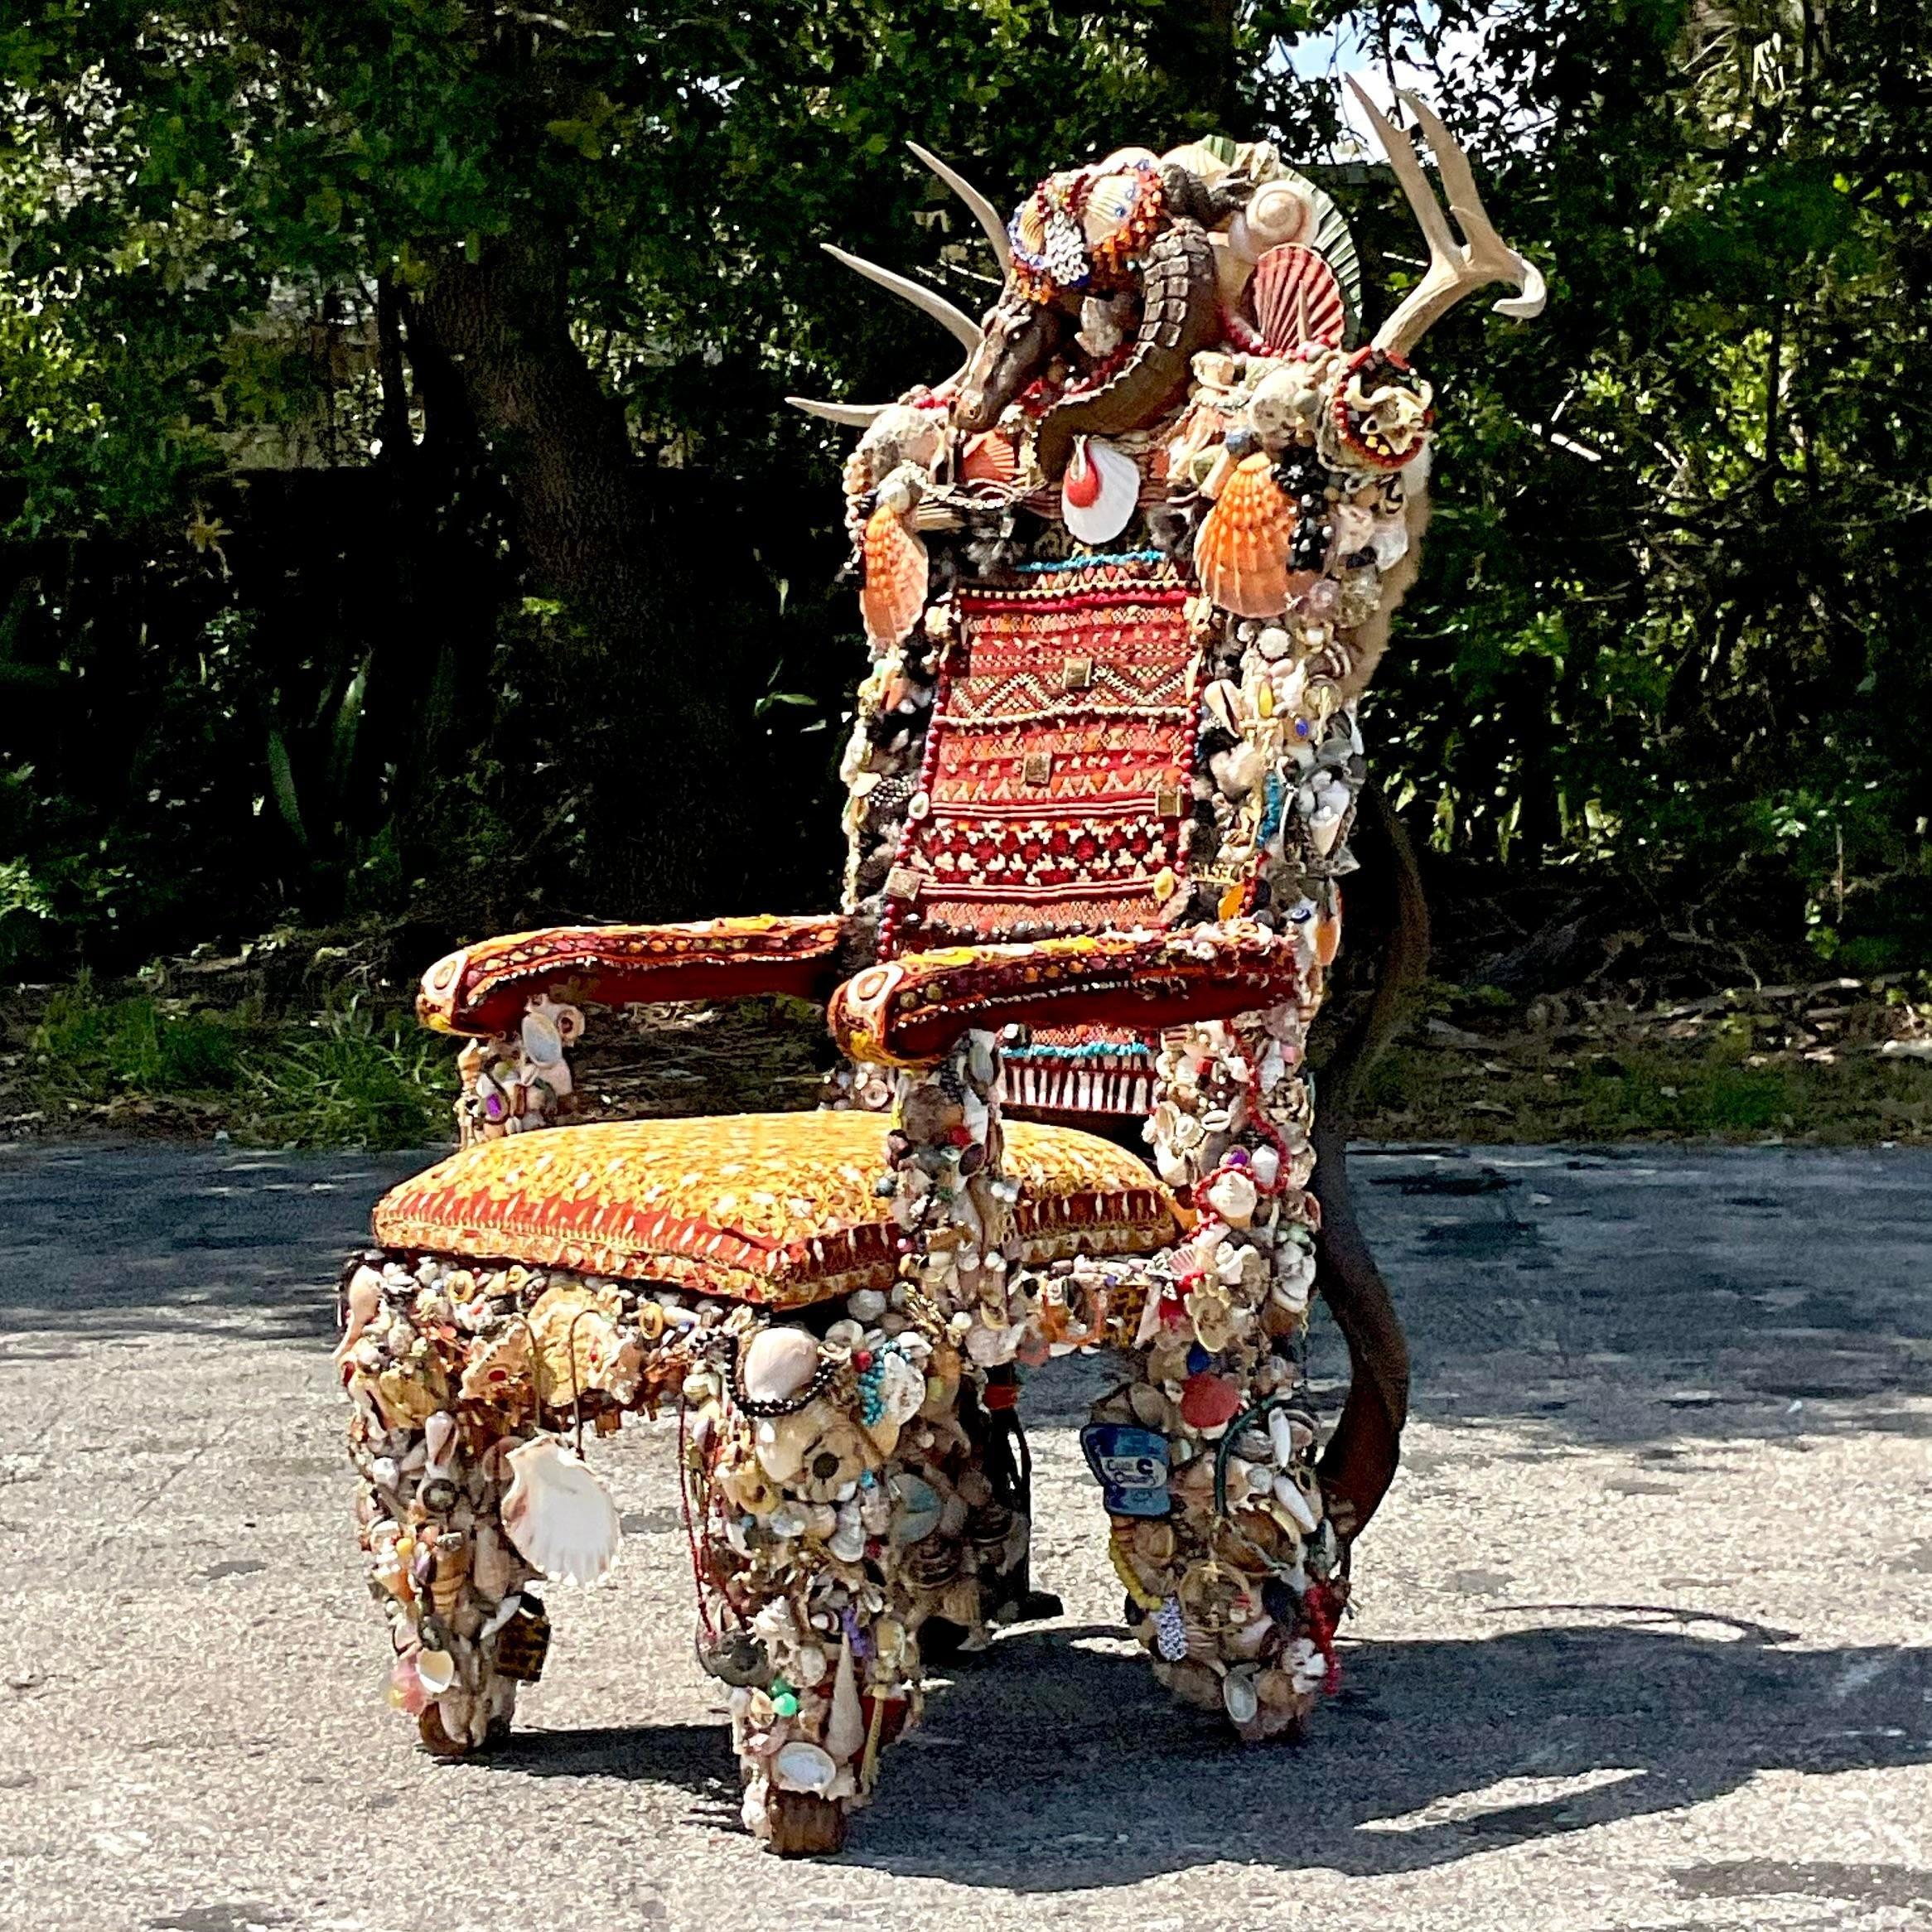 Embrace the spirit of American folk art with this unique Vintage Chair crafted from found objects. Each piece tells a story, blending whimsy and heritage in a one-of-a-kind creation. Perfect for eclectic spaces seeking a touch of Americana, this